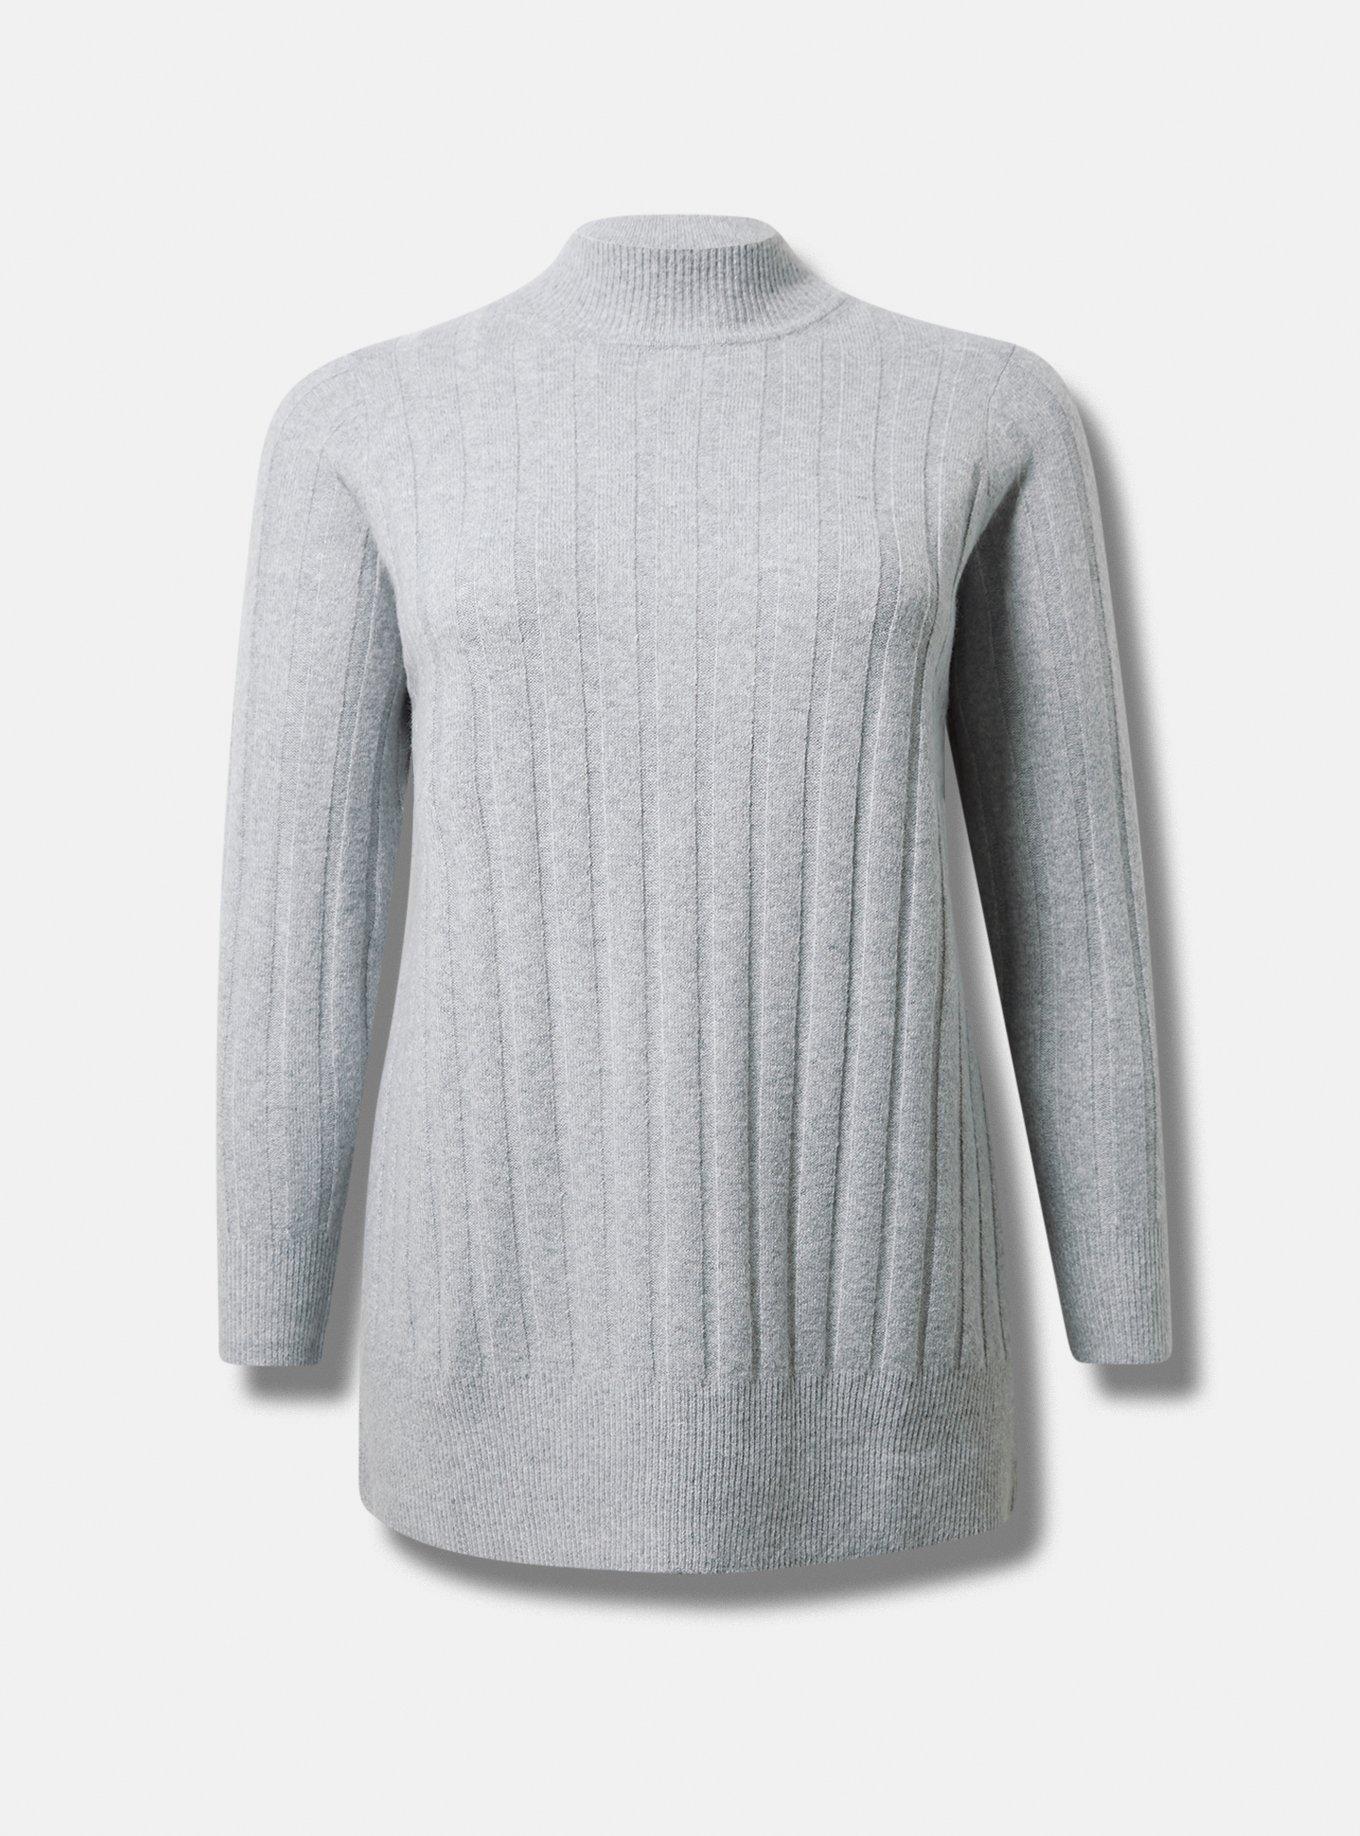 Recycled Cashmere Turtleneck Sweater - Heather Charcoal